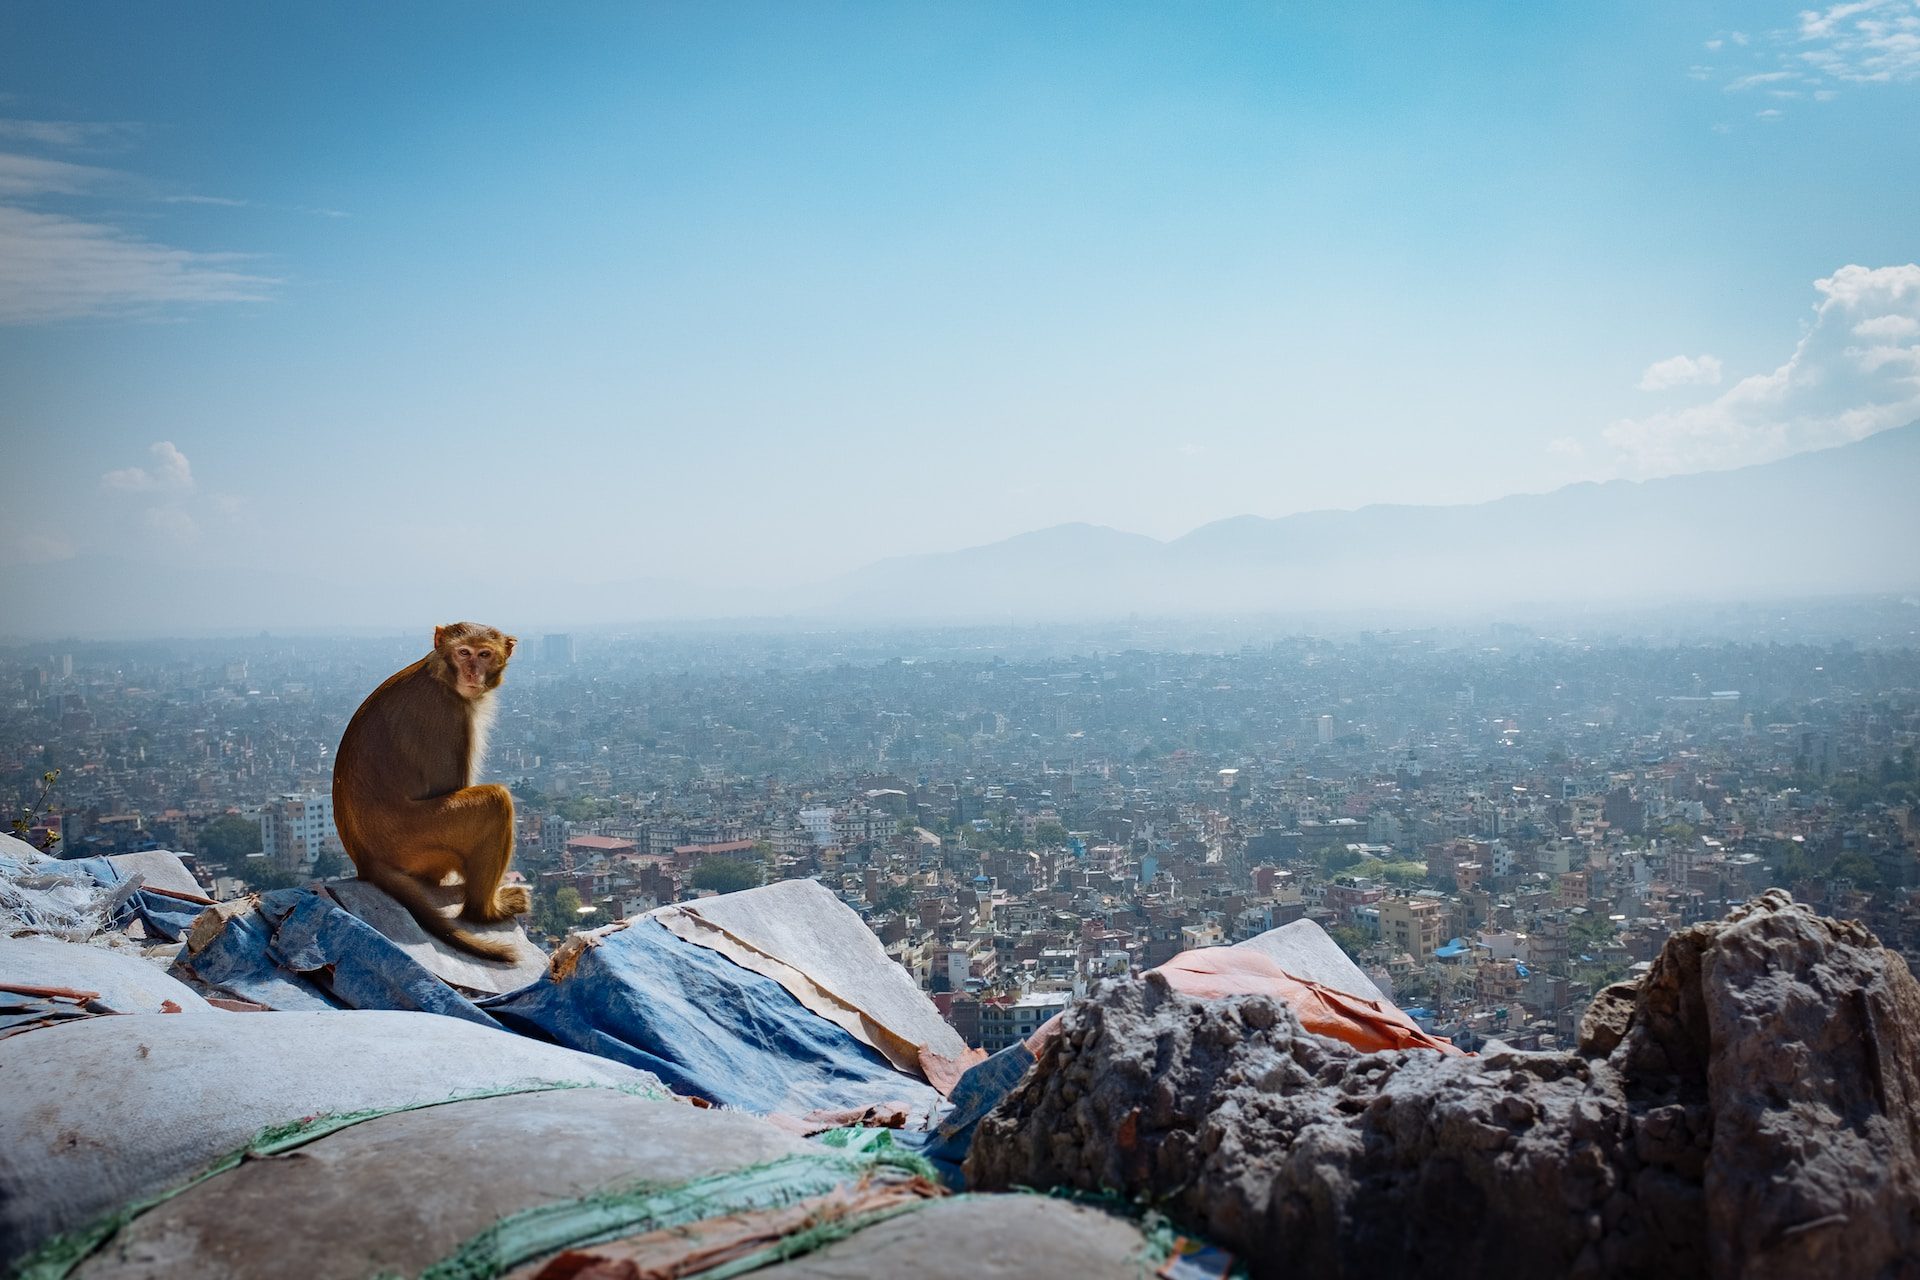 A monkey sitting on a cliff ledge with a panoramic view of Kathmandu behind and blue skies above.